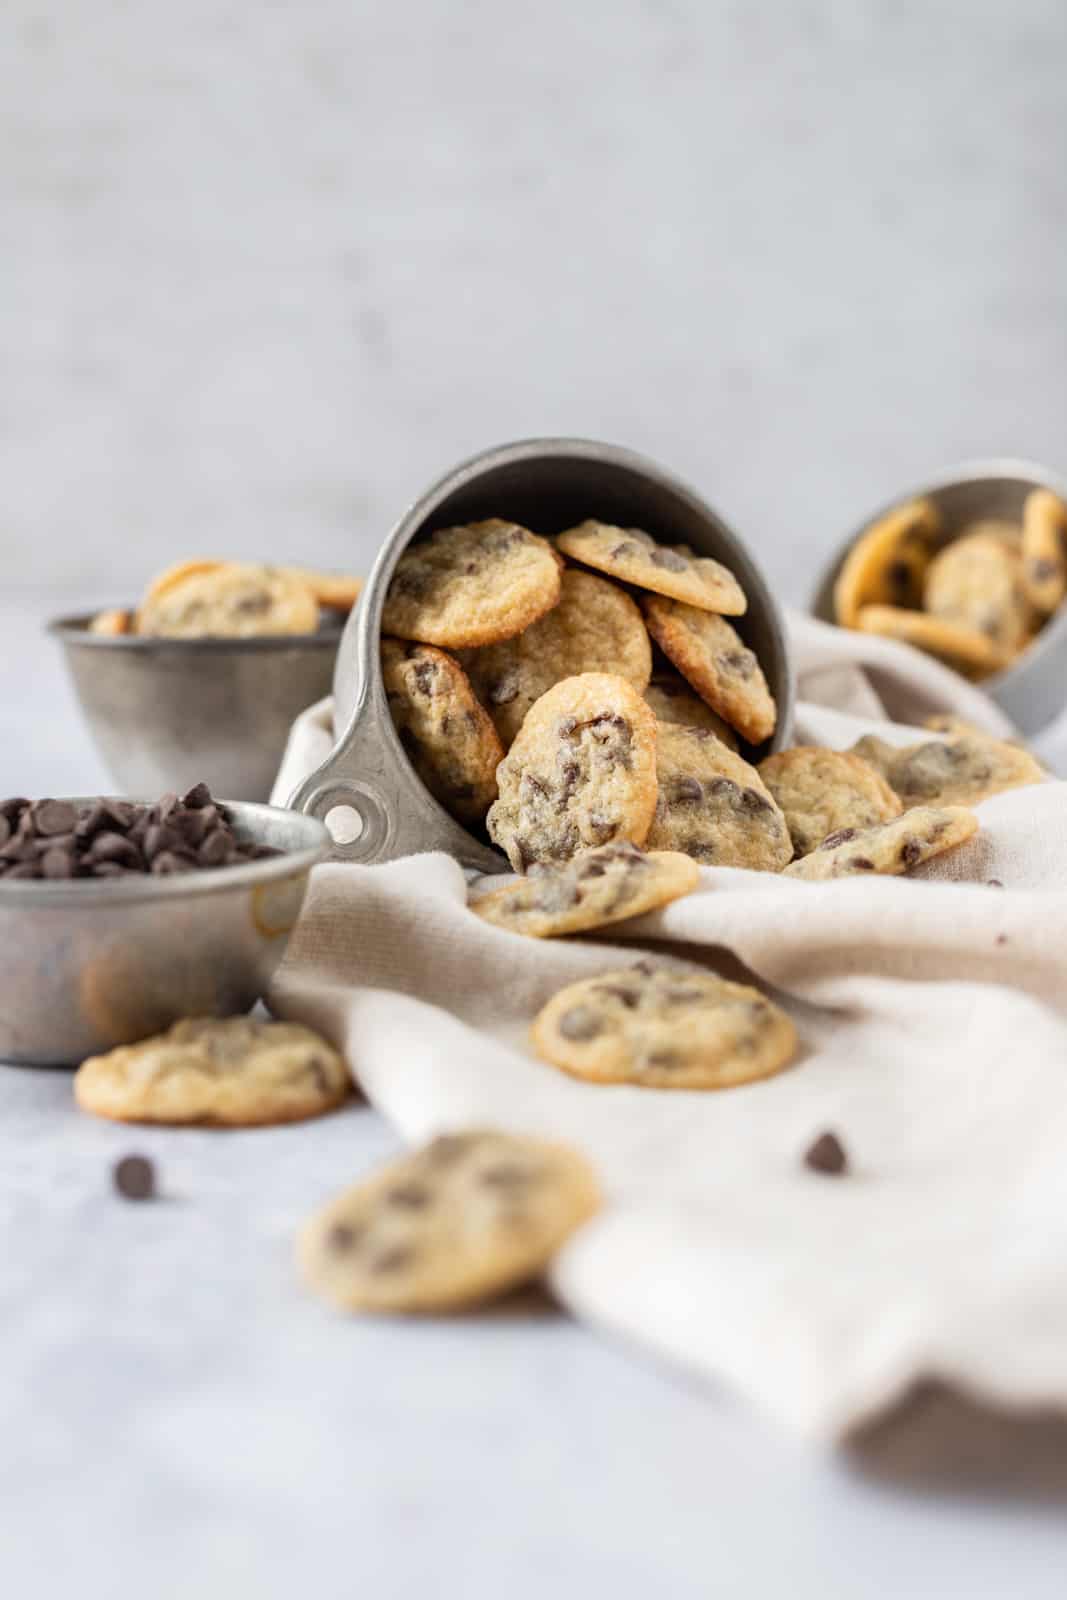 a cup full of mini chocolate chip cookies spilled over on a linen napkin.